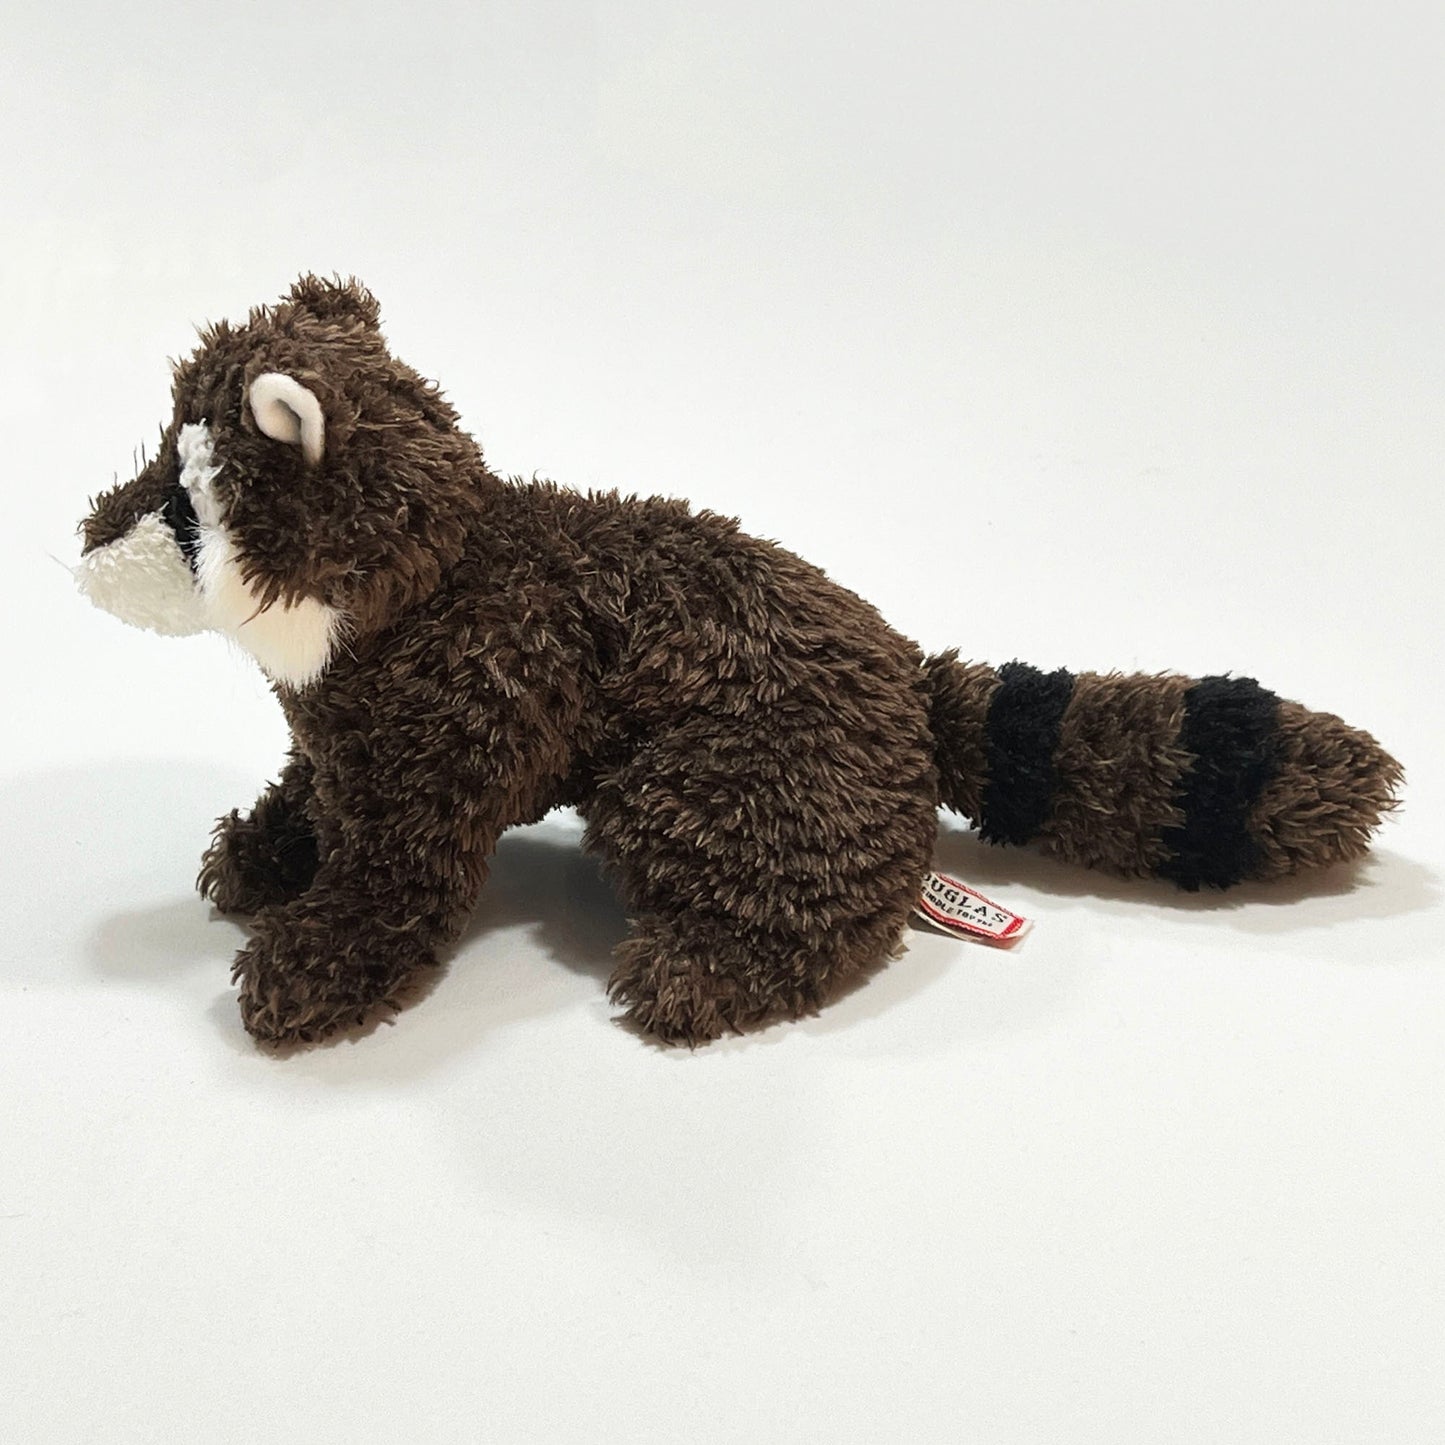 Douglas-The-Cuddle-Toy-Dark-Brown-Raccoon-Plush-Toy.-Side-view.-Angleview.-Shop-eBargainsAndDeals.com